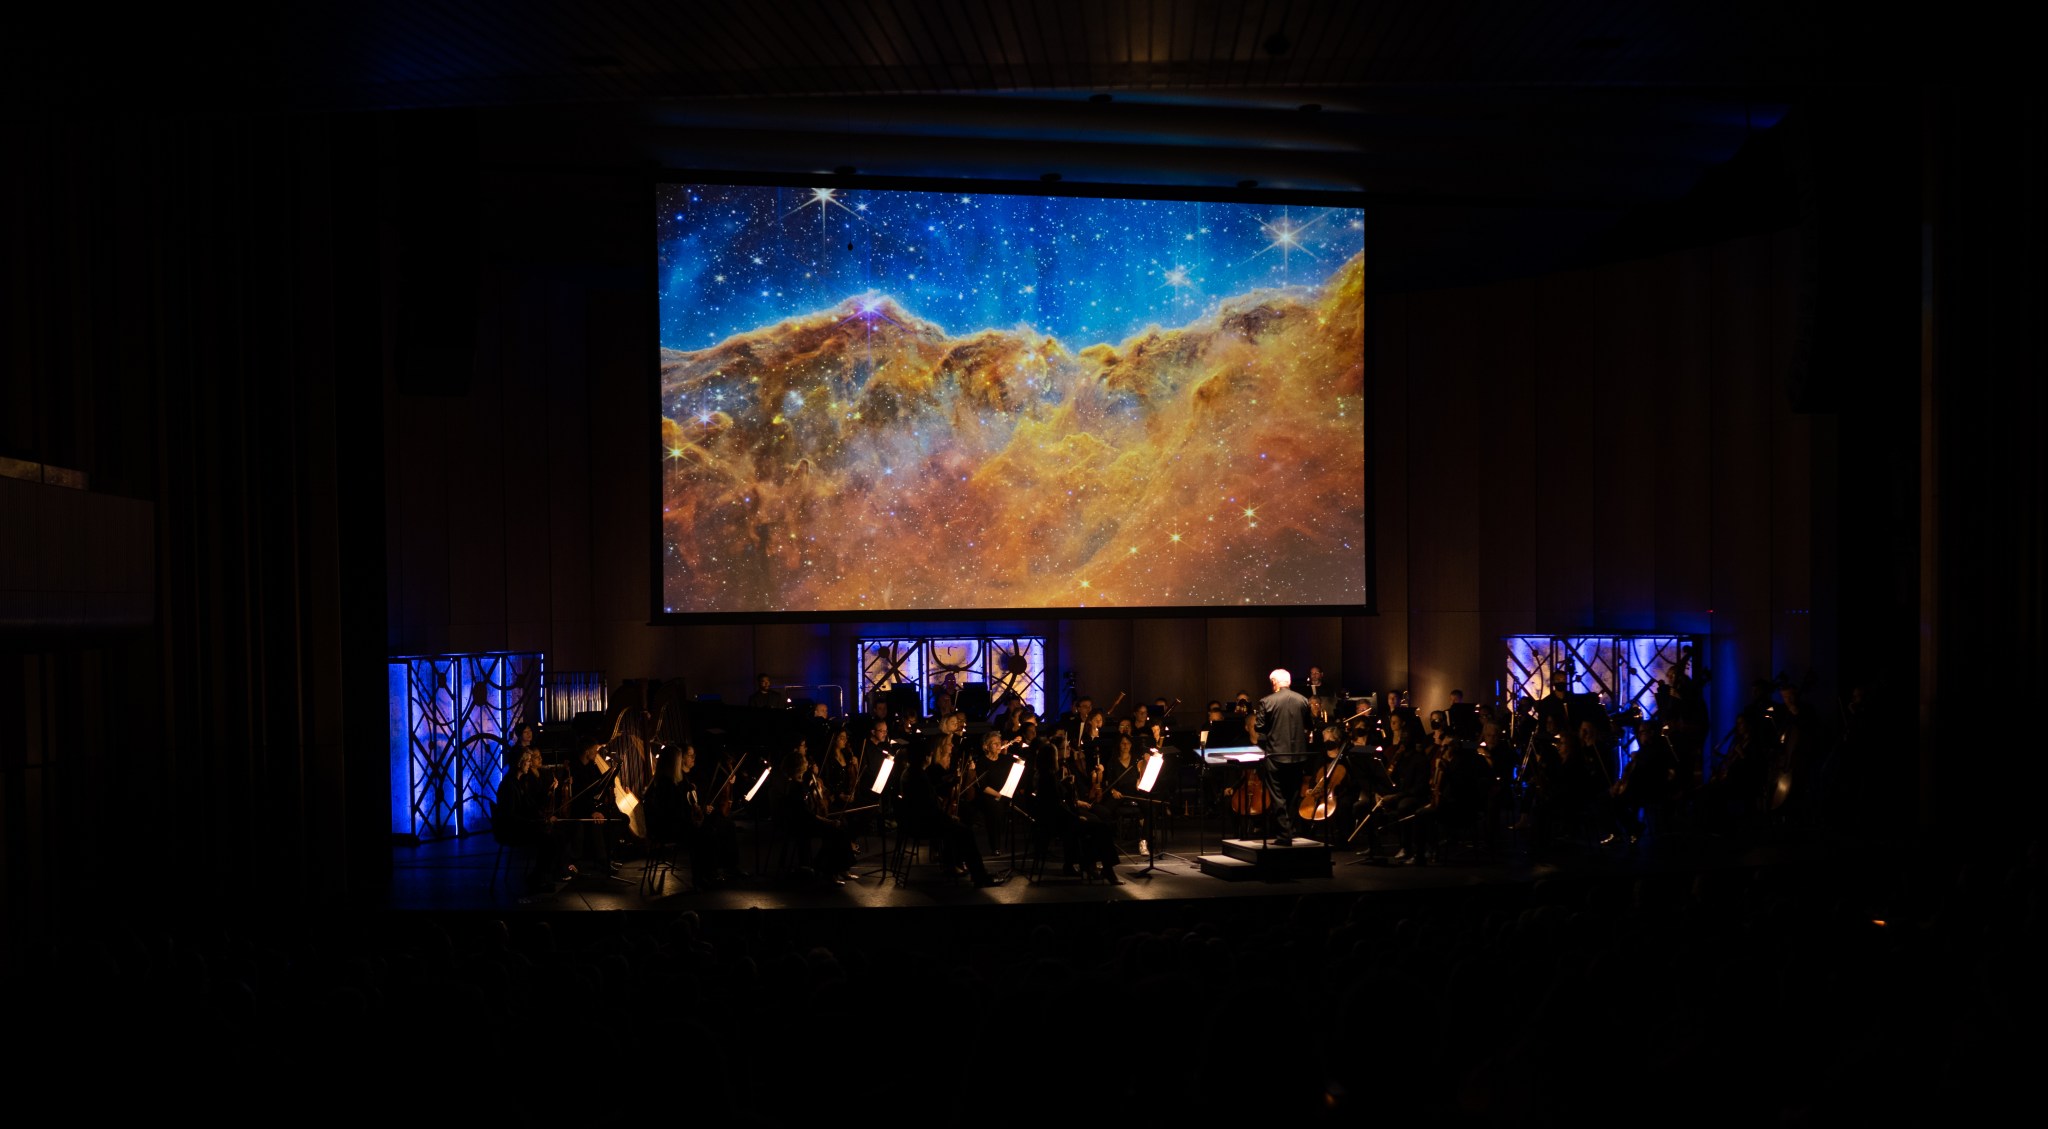 A darkened orchestra stage in a concert hall, with the James Webb Space Telescope image of the Carina Nebula projected on the screen. The theater appears mostly black, with the orchestra members faintly visible on stage and purple glowing panels lining the back of the stage. The image of the nebula looks like a bright orange cloud covering the bottom half of the screen, with jewel-tone blue and turquoise space visible behind. Bright stars sparkle throughout the image.